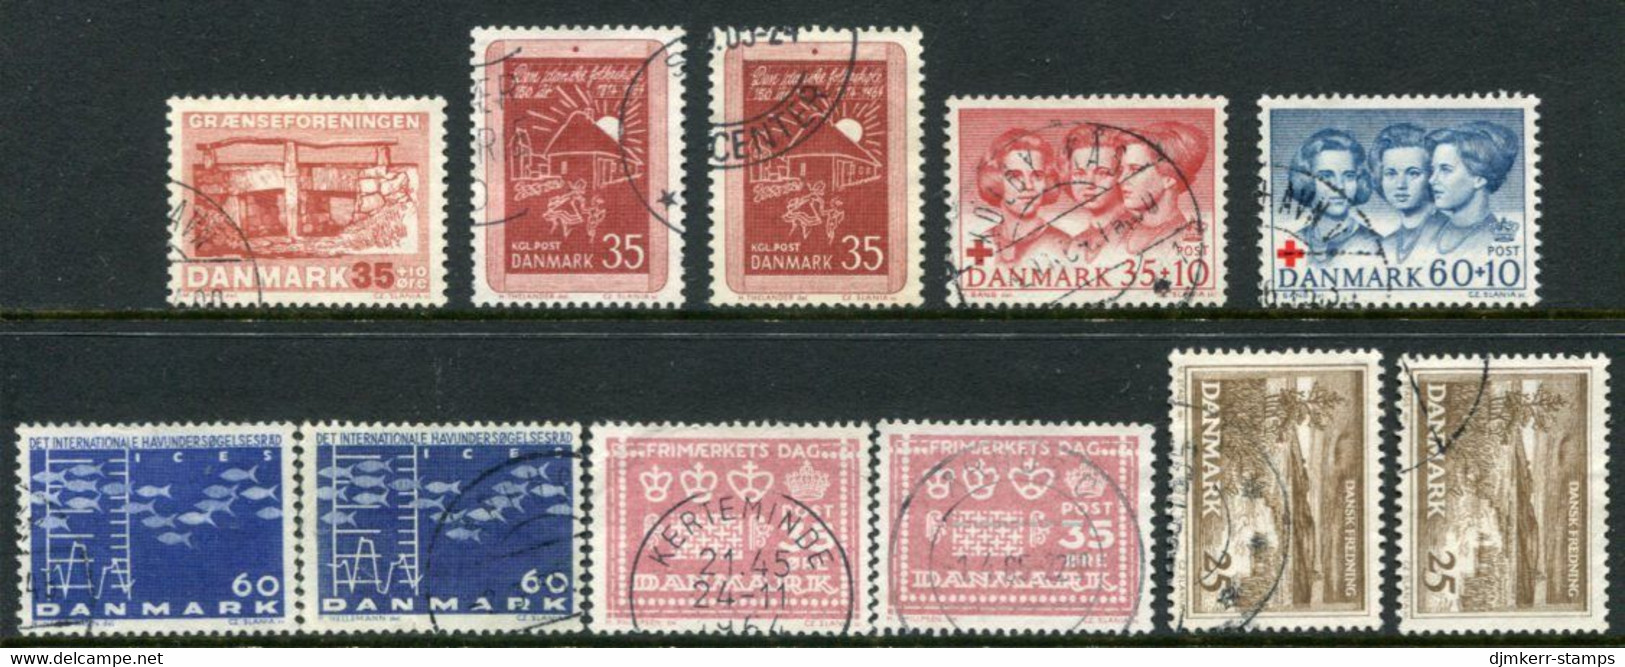 DENMARK 1964 Complete Issues With Ordinary And Fluorescent Papers, Used Michel 419-425y - Gebraucht